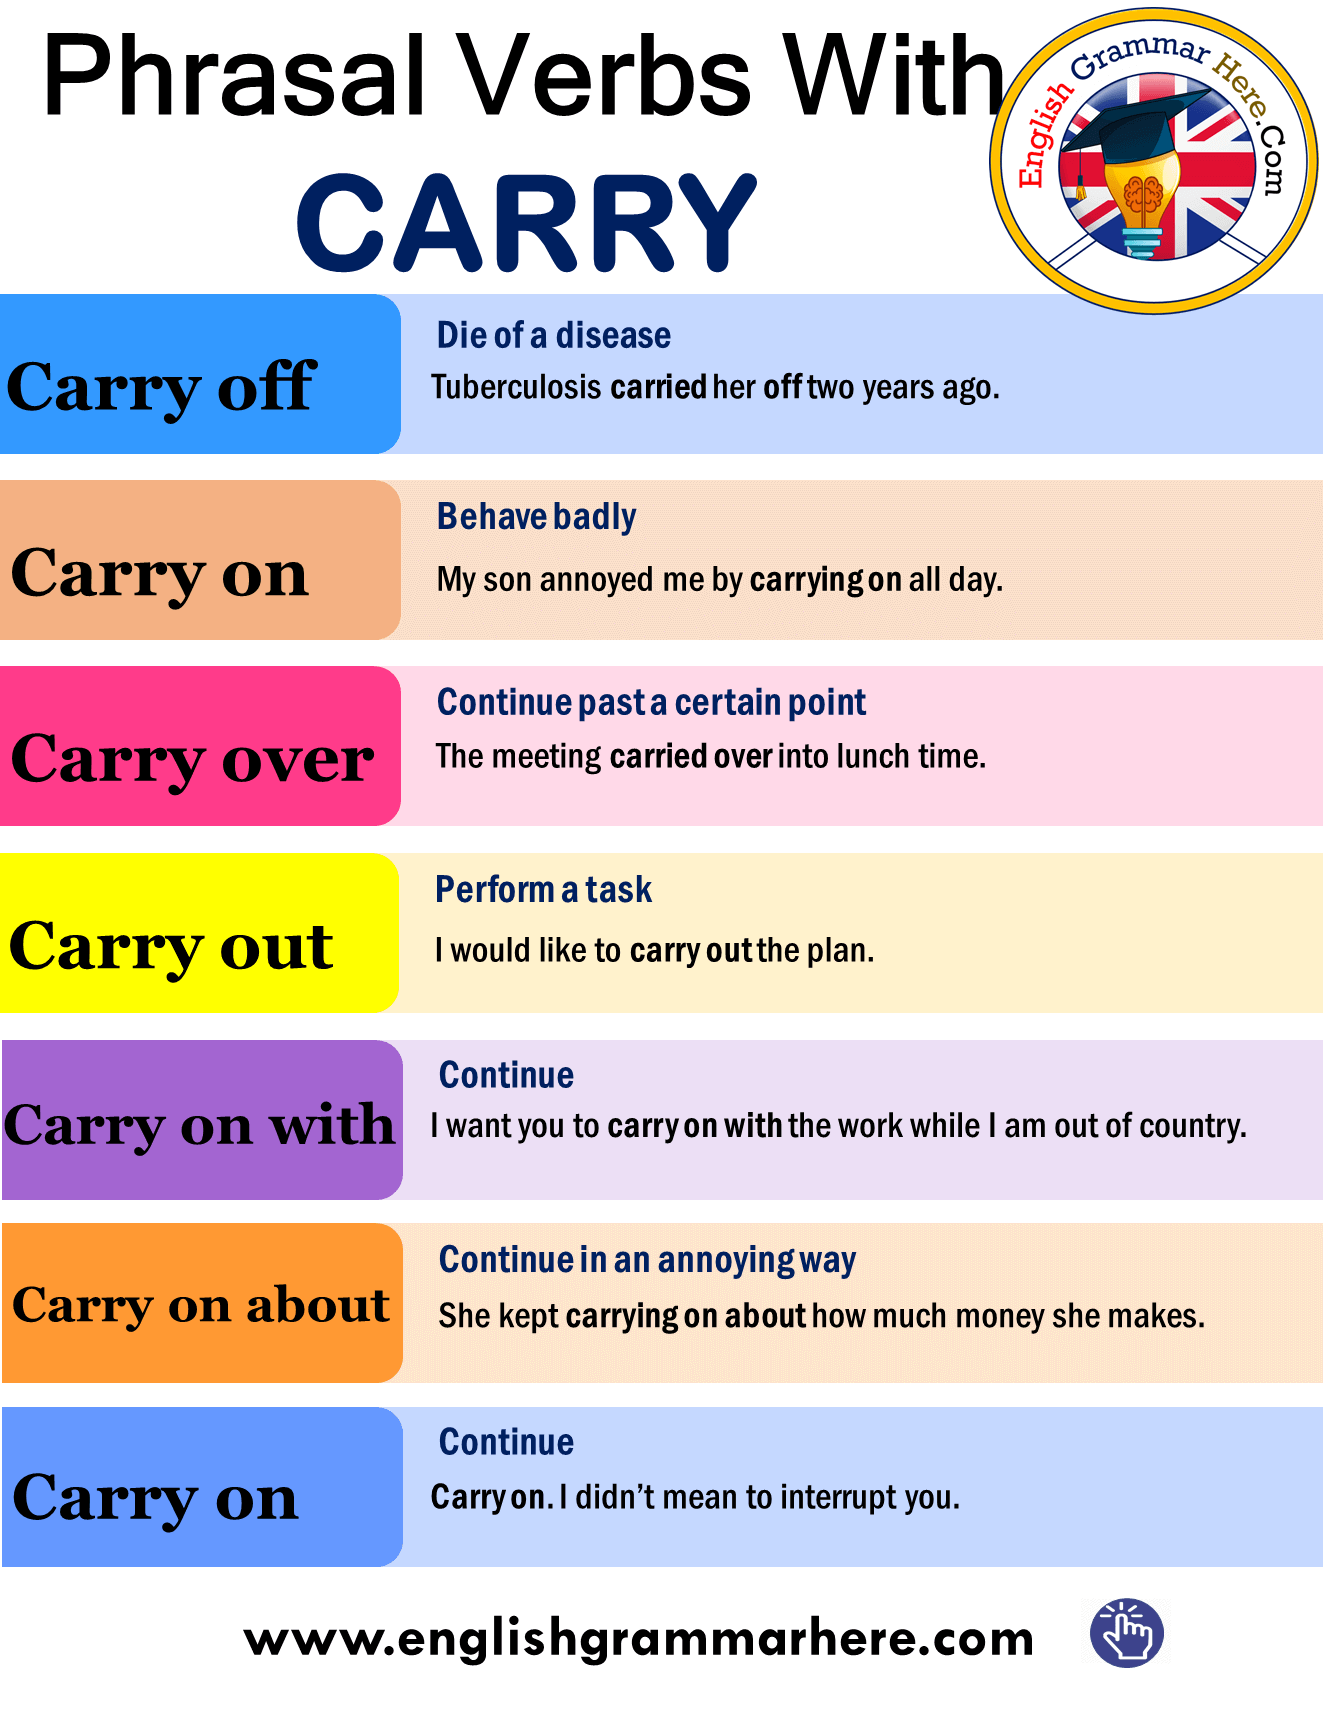 Phrasal Verbs With CARRY in English